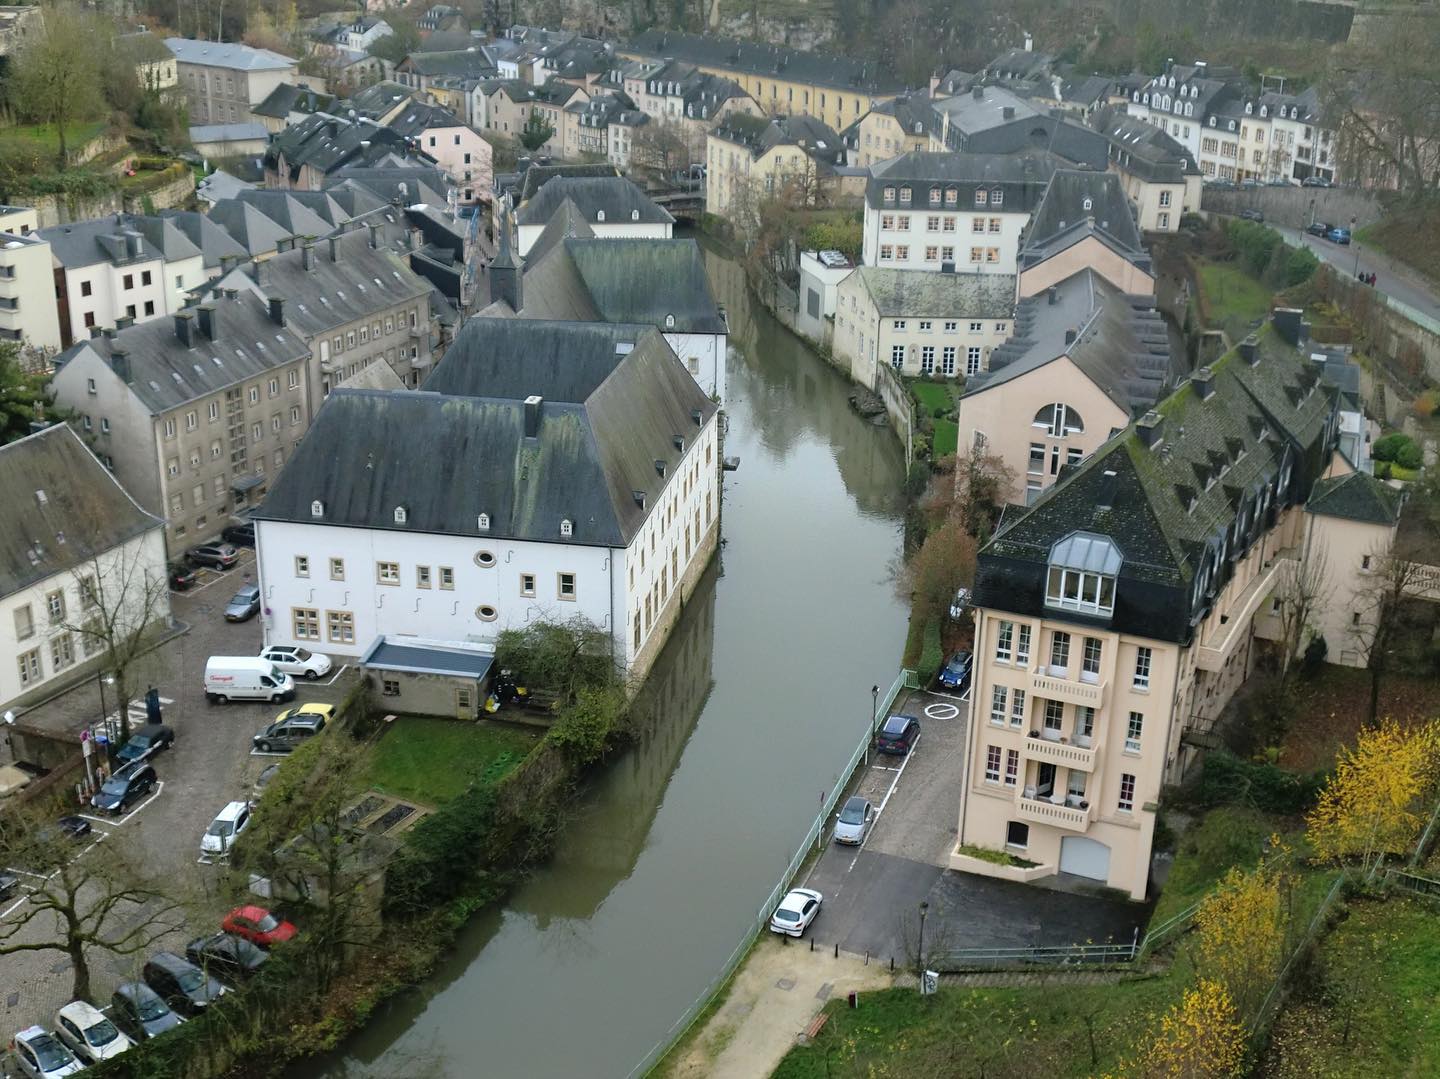 Following the river to see Luxemburg City.
-
#travelphotography #travelblogger #luxembourg #luxemburg #luxemburgcity #reflection #reflections #travel #travelgram #igluxembourg @luxembourg_portal